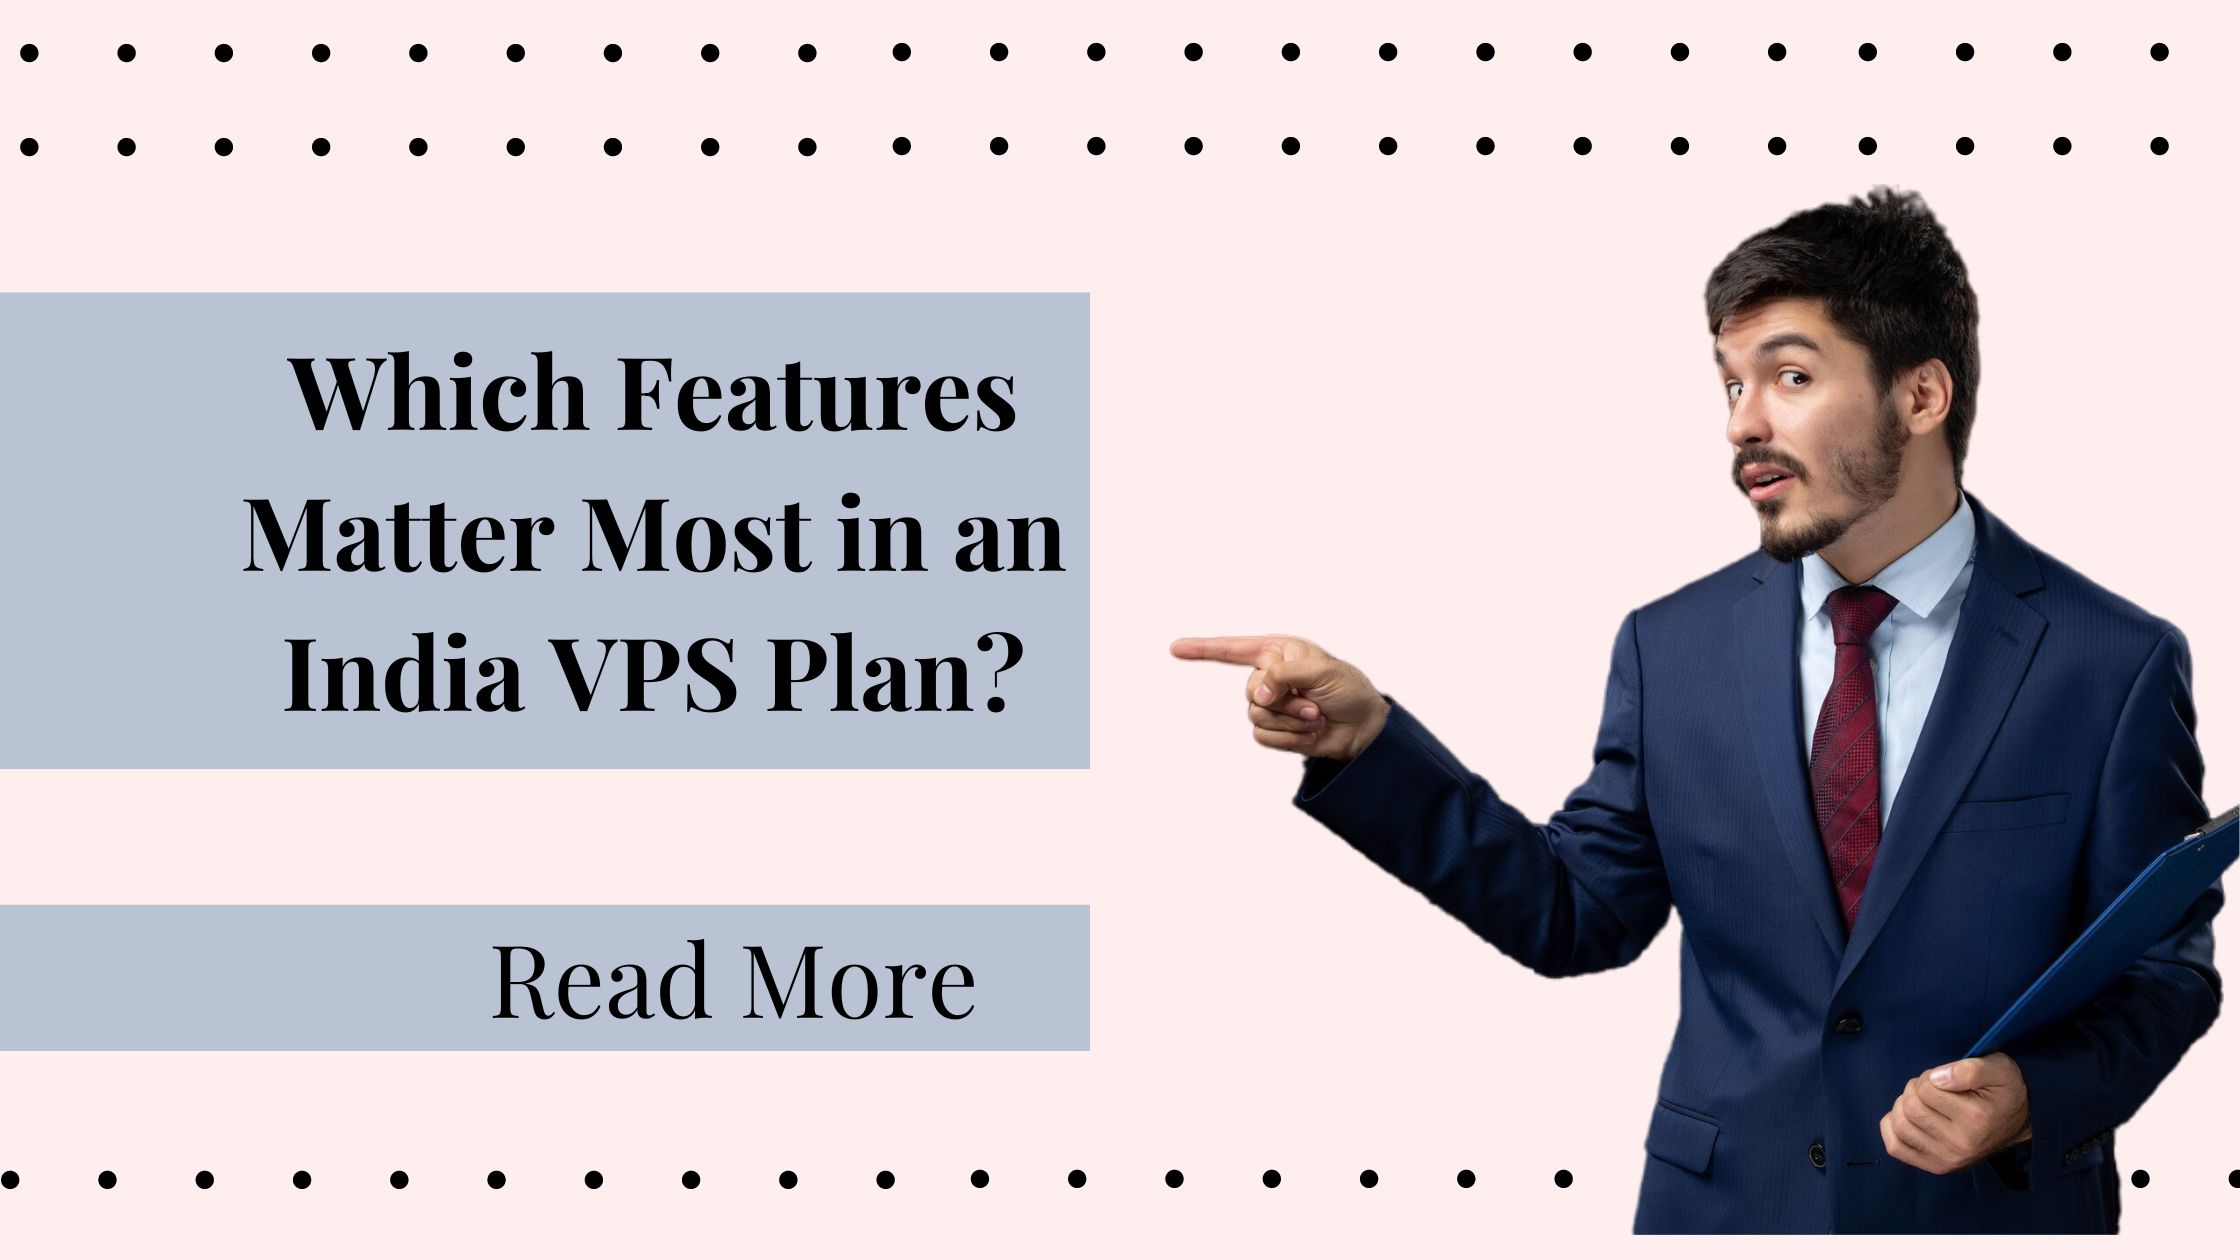 Which Features Matter Most in an India VPS Plan?”